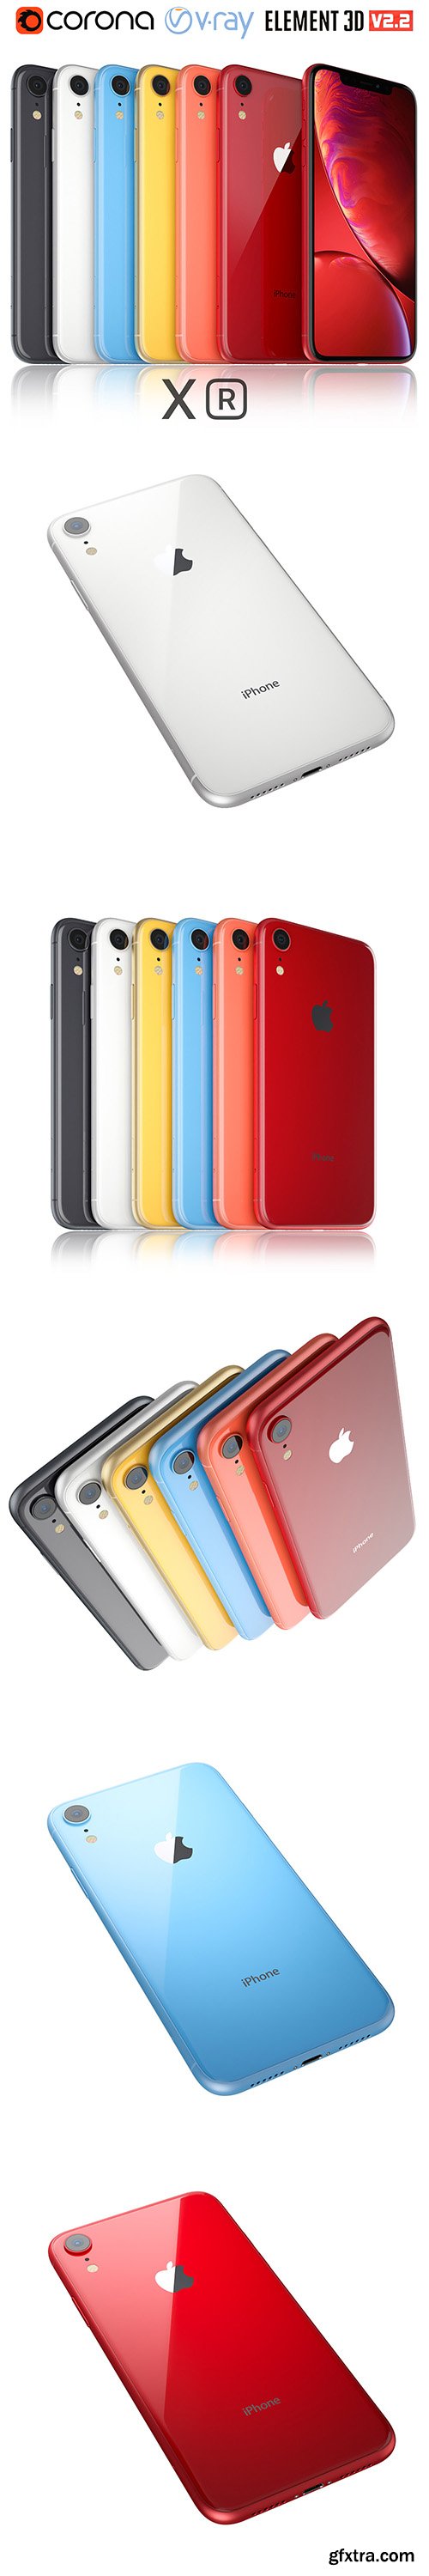 Cubebrush - Apple iPhone Xr All colors